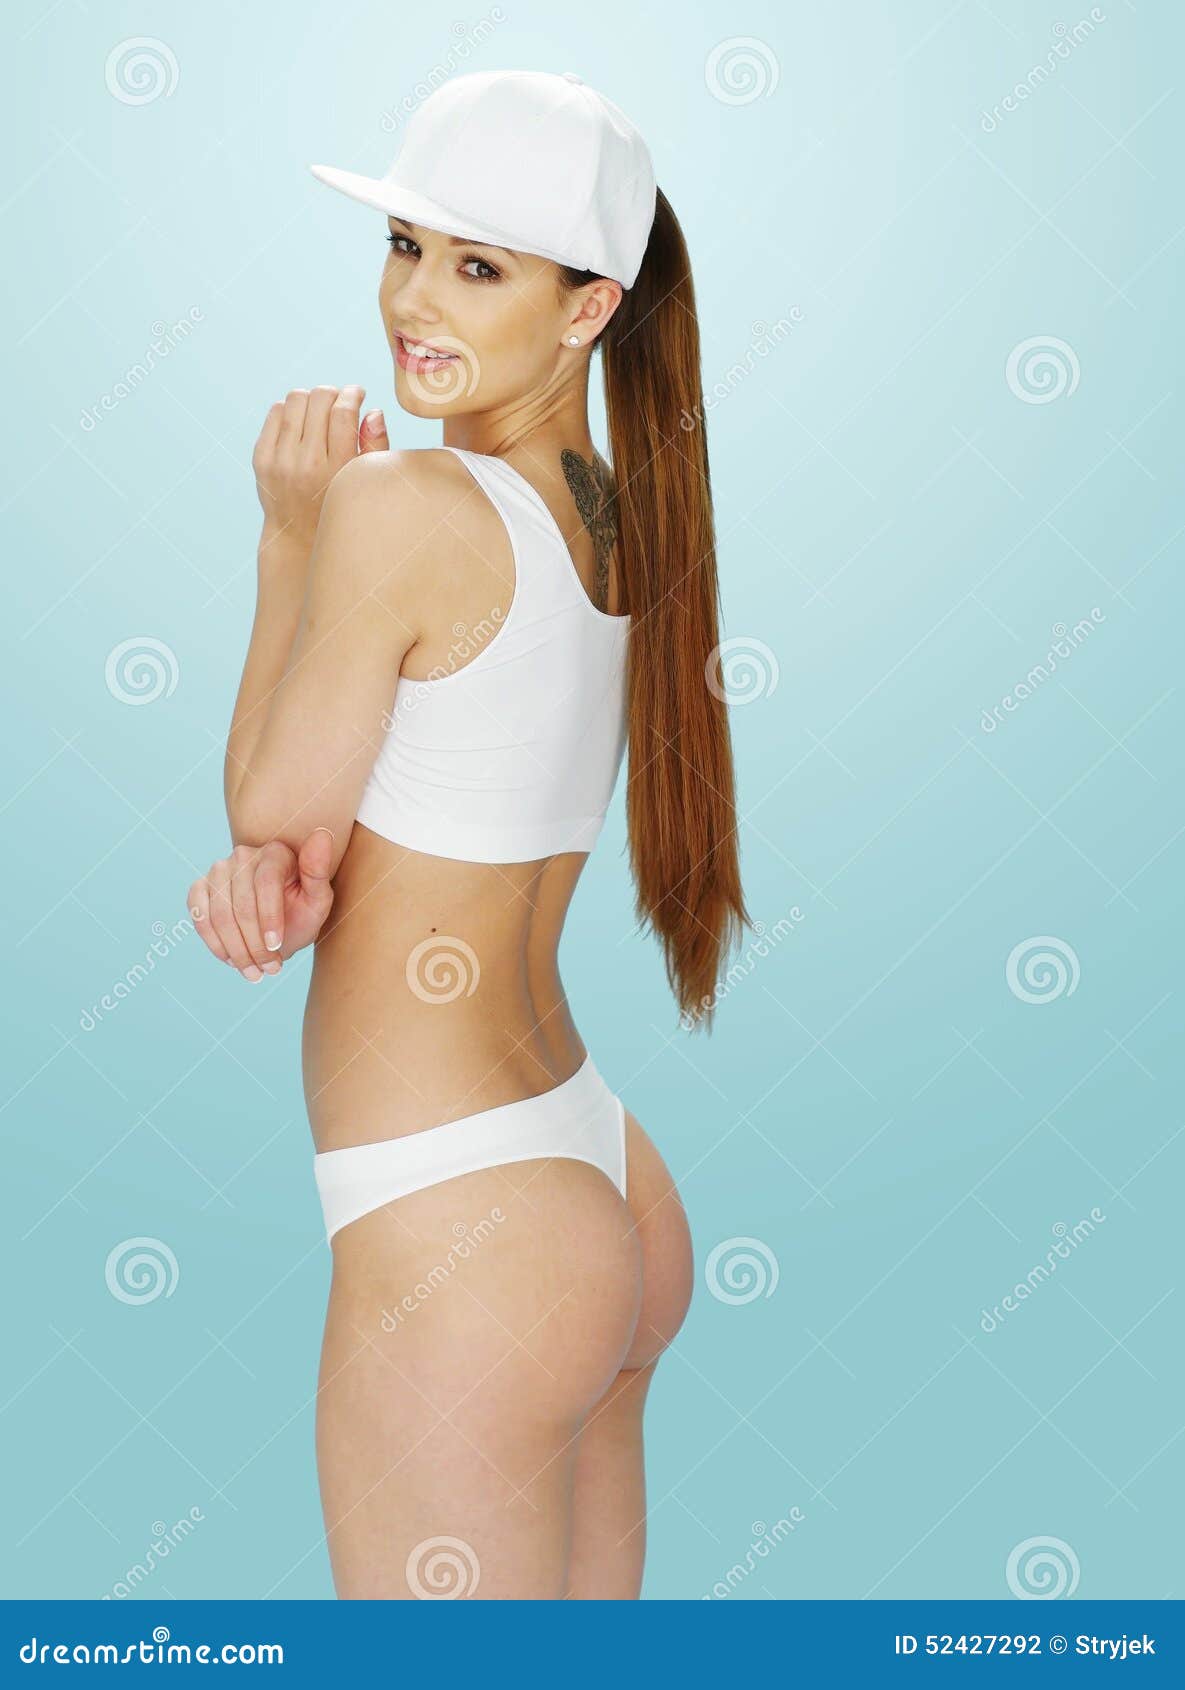 Attractive Young Woman In White Underwear Is Looking At Camera